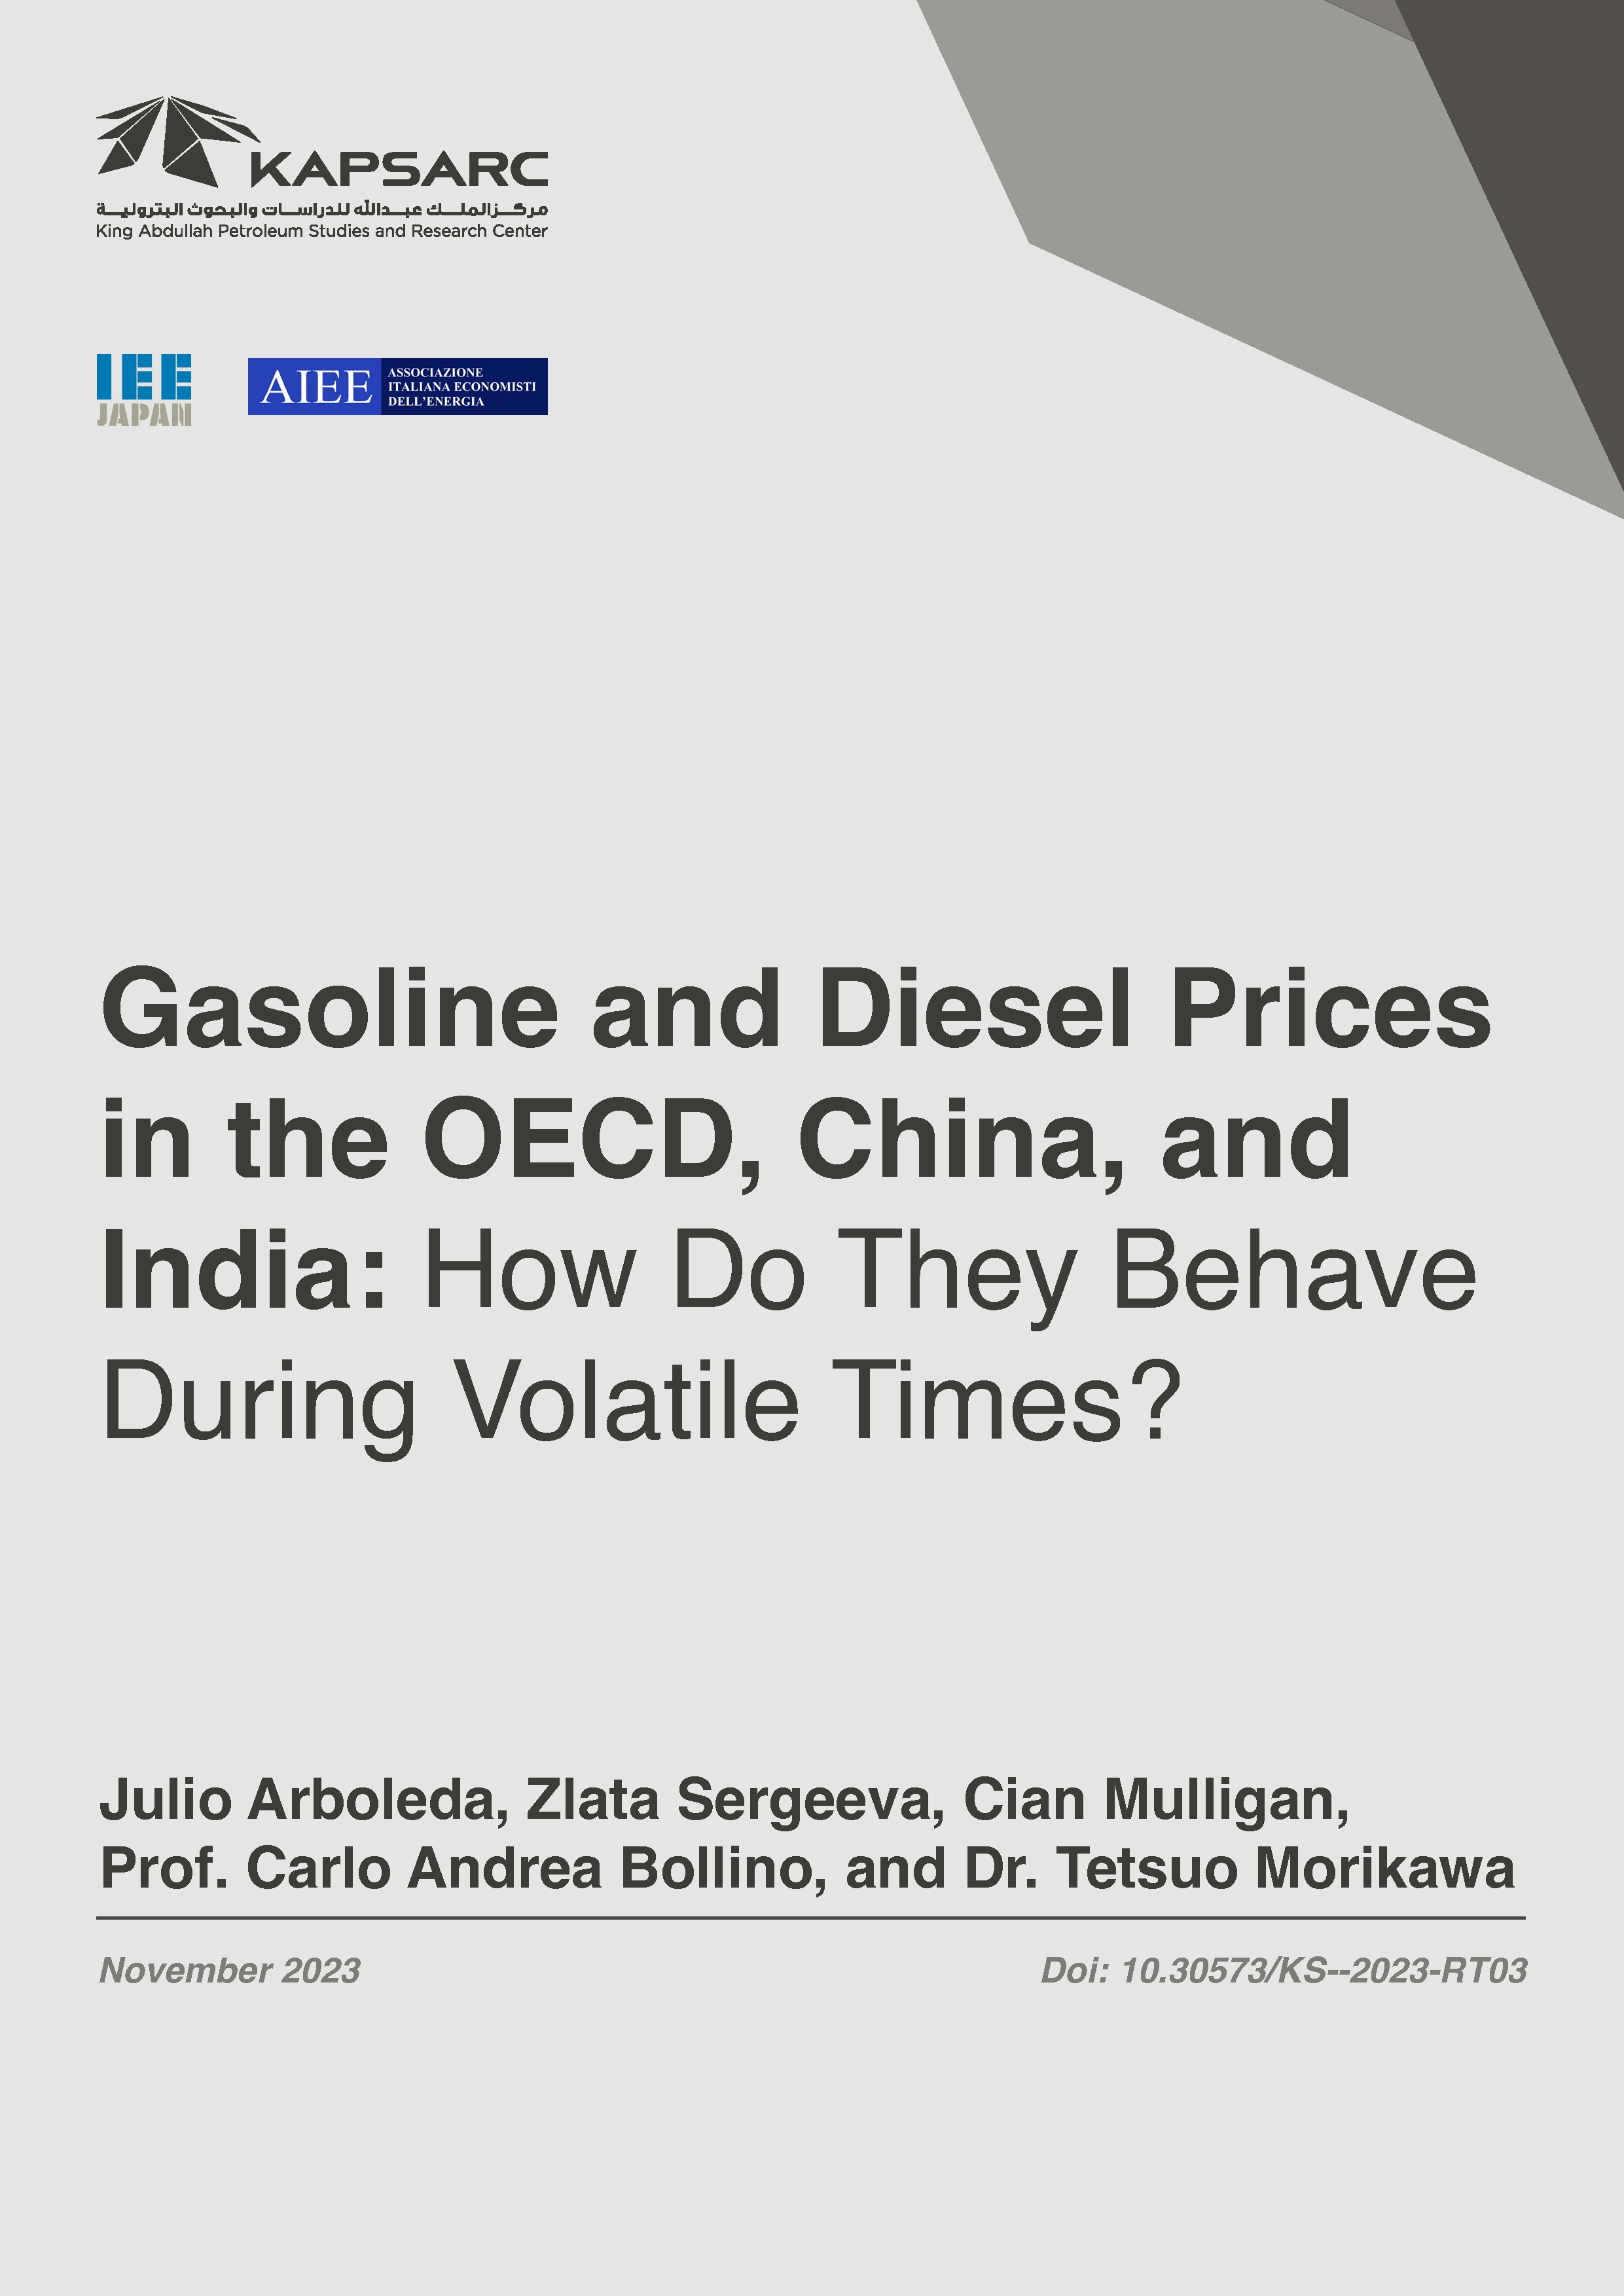 Gasoline and Diesel Prices in the OECD, China, and India: How Do They Behave During Volatile Times?